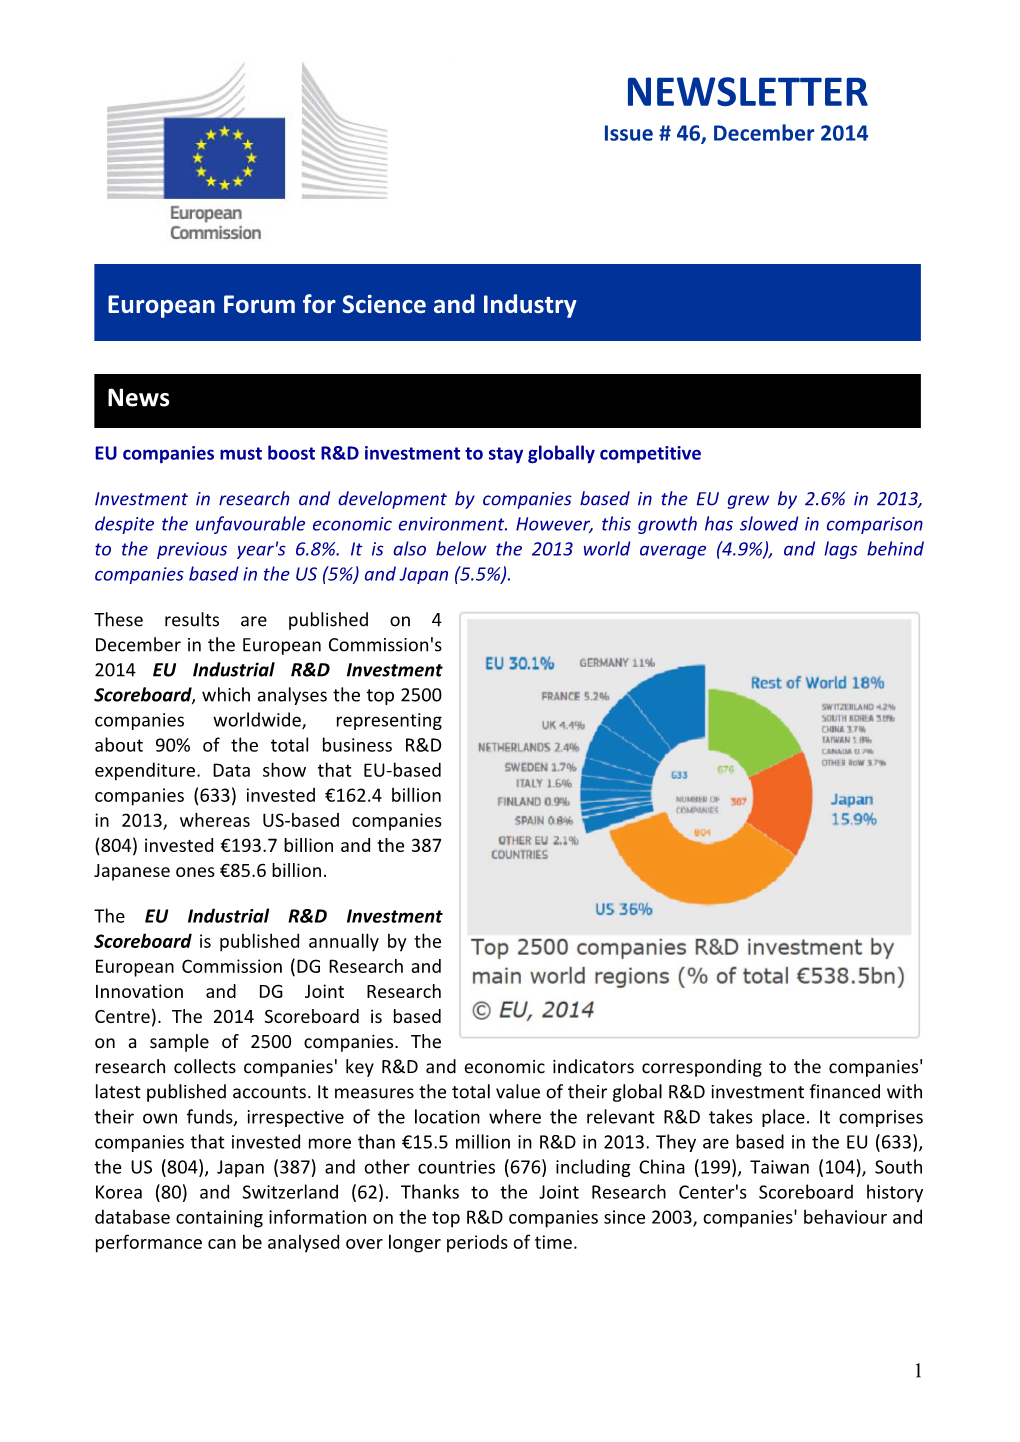 European Forum for Science and Industry Newsletter, Issue #46